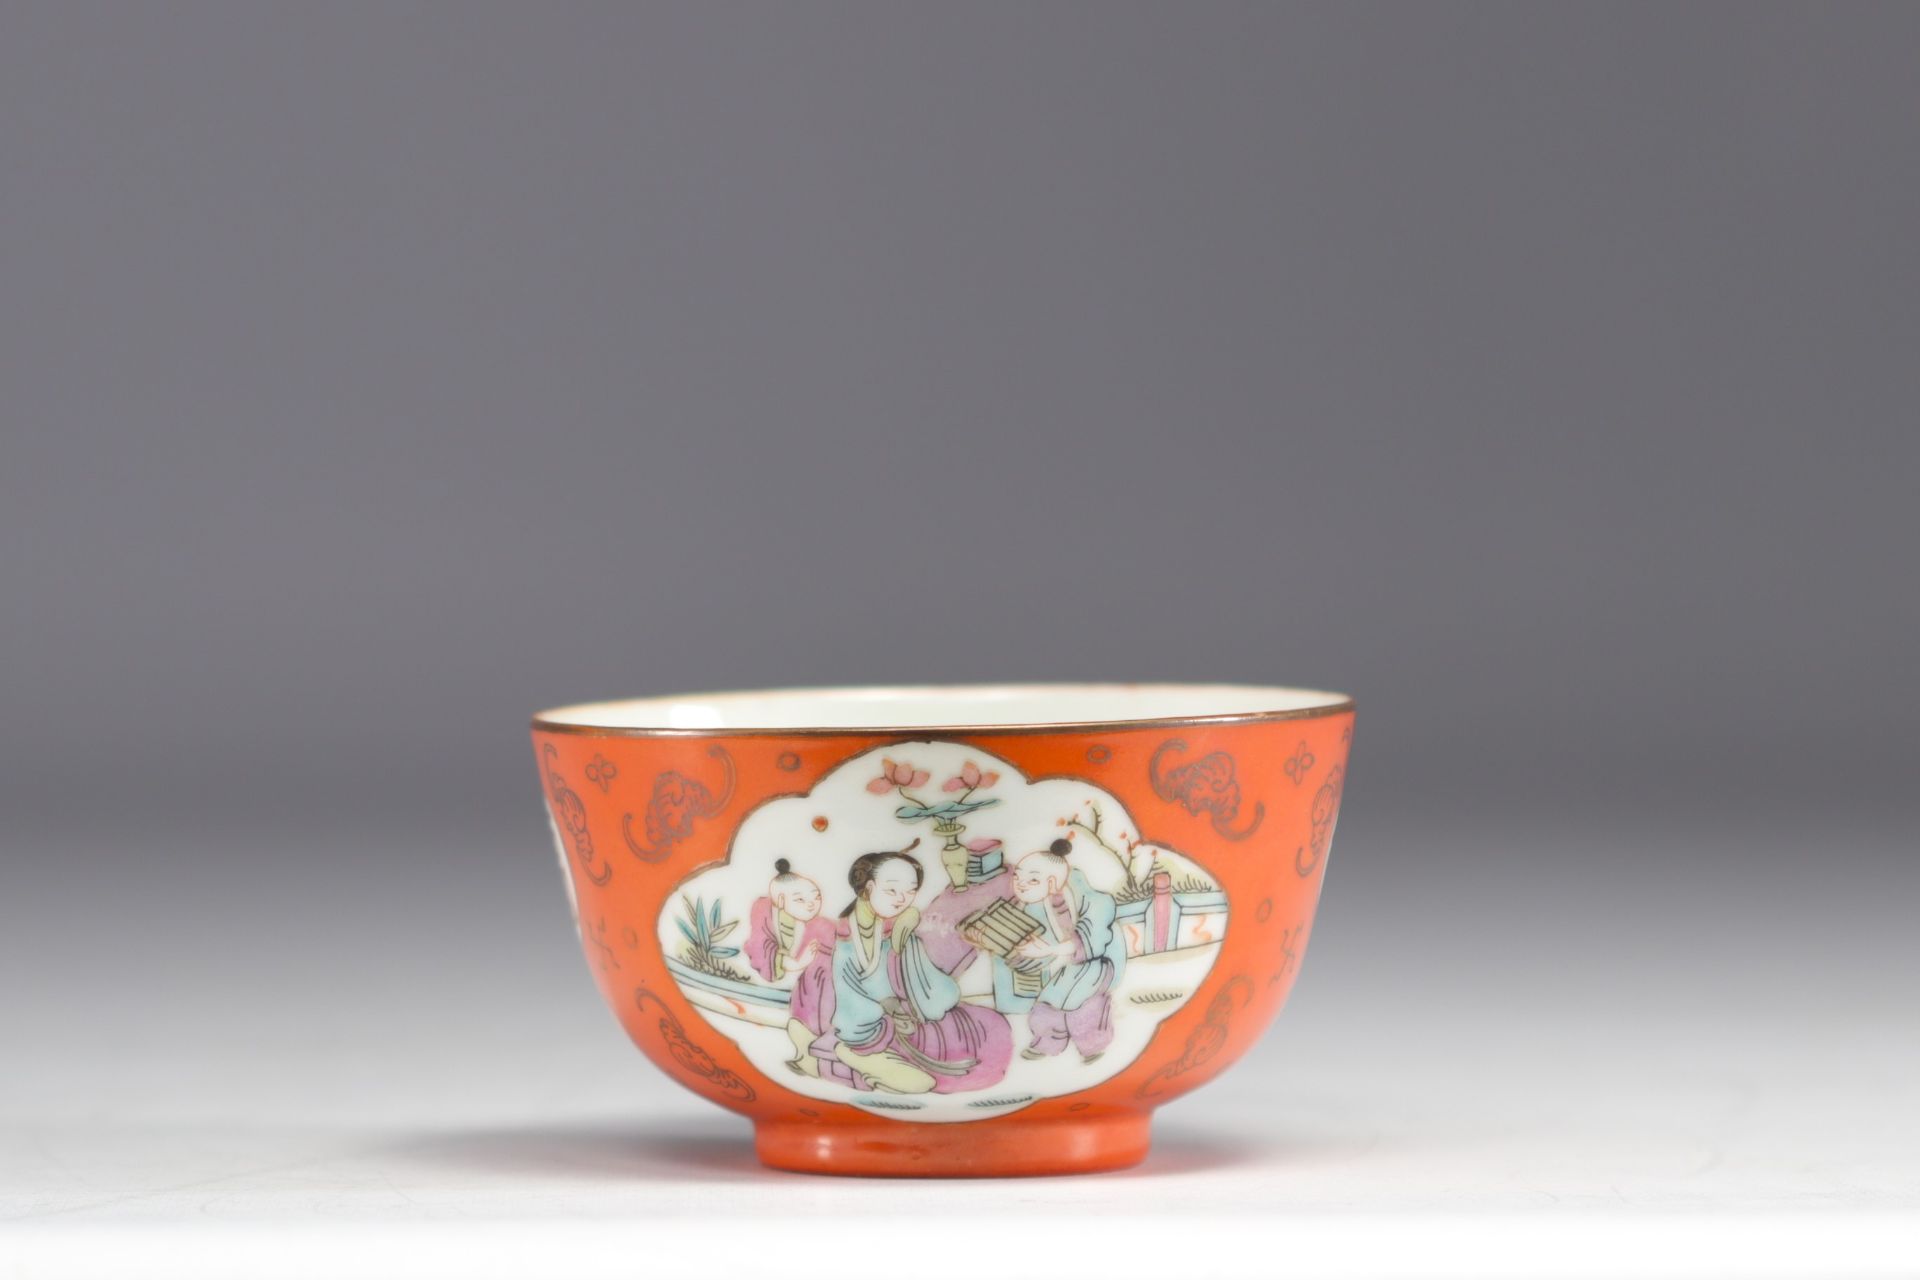 China - An orange porcelain bowl decorated with figures and bats, 19th century. - Image 3 of 5